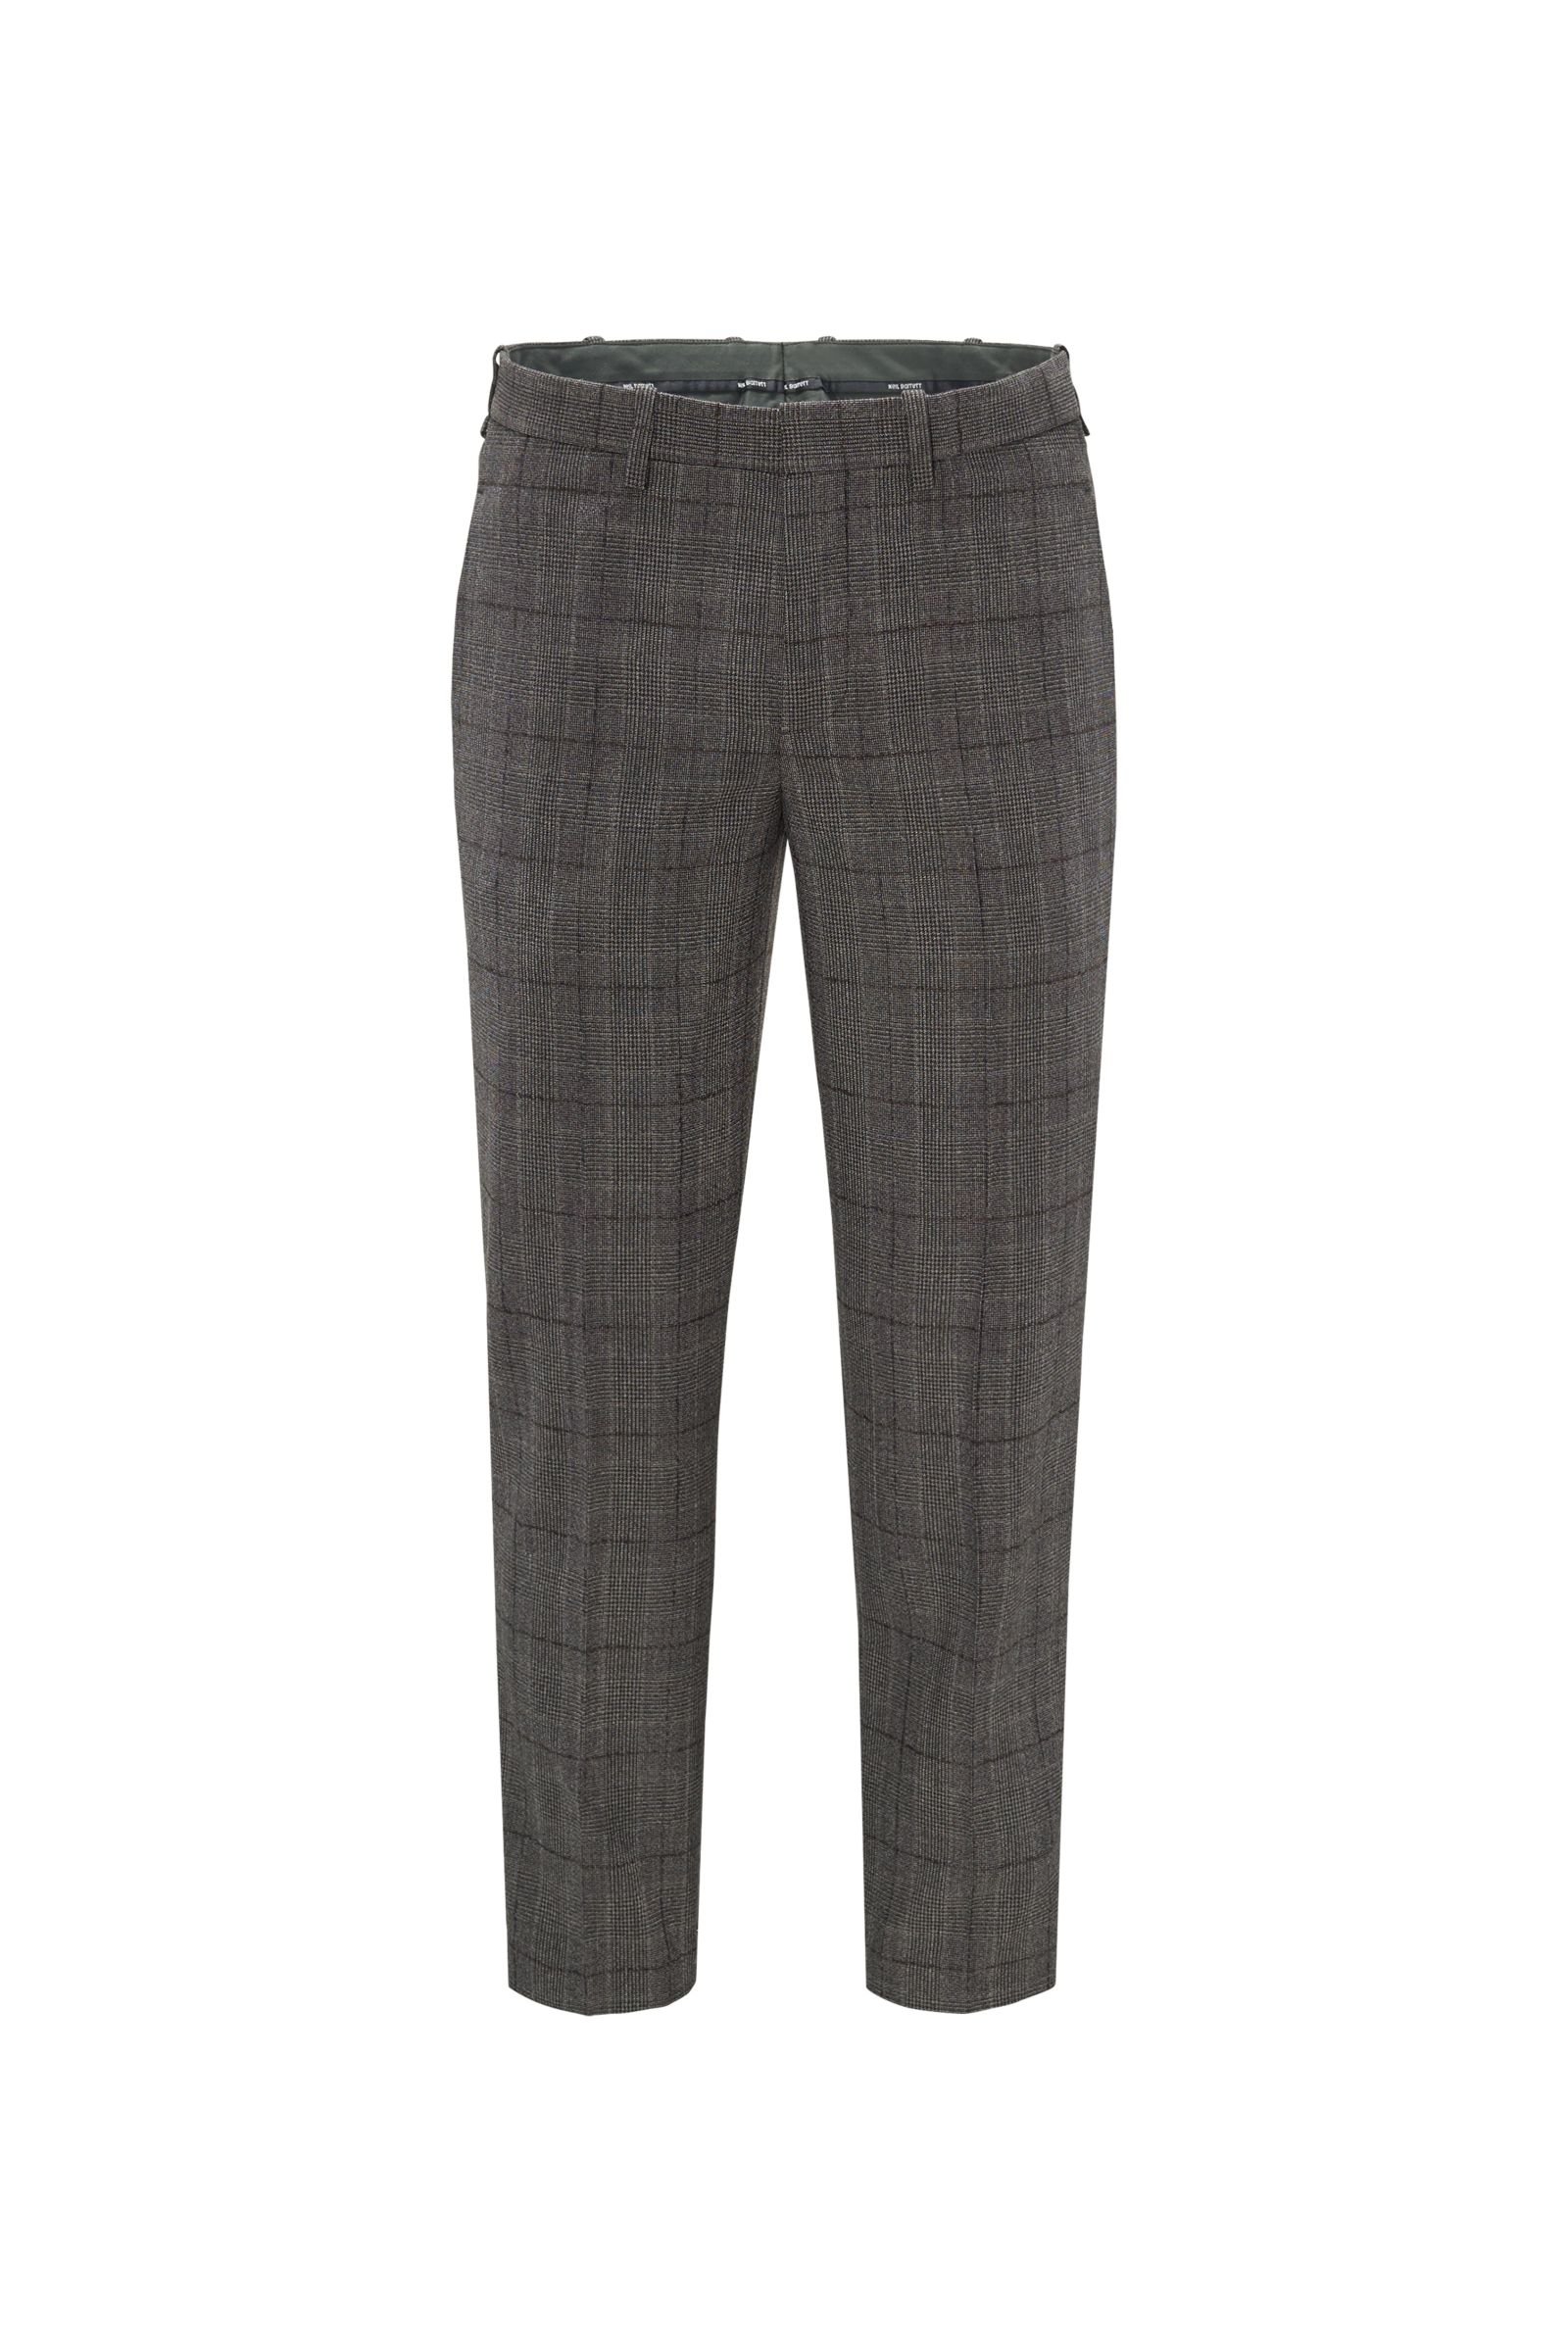 Wool trousers grey checked